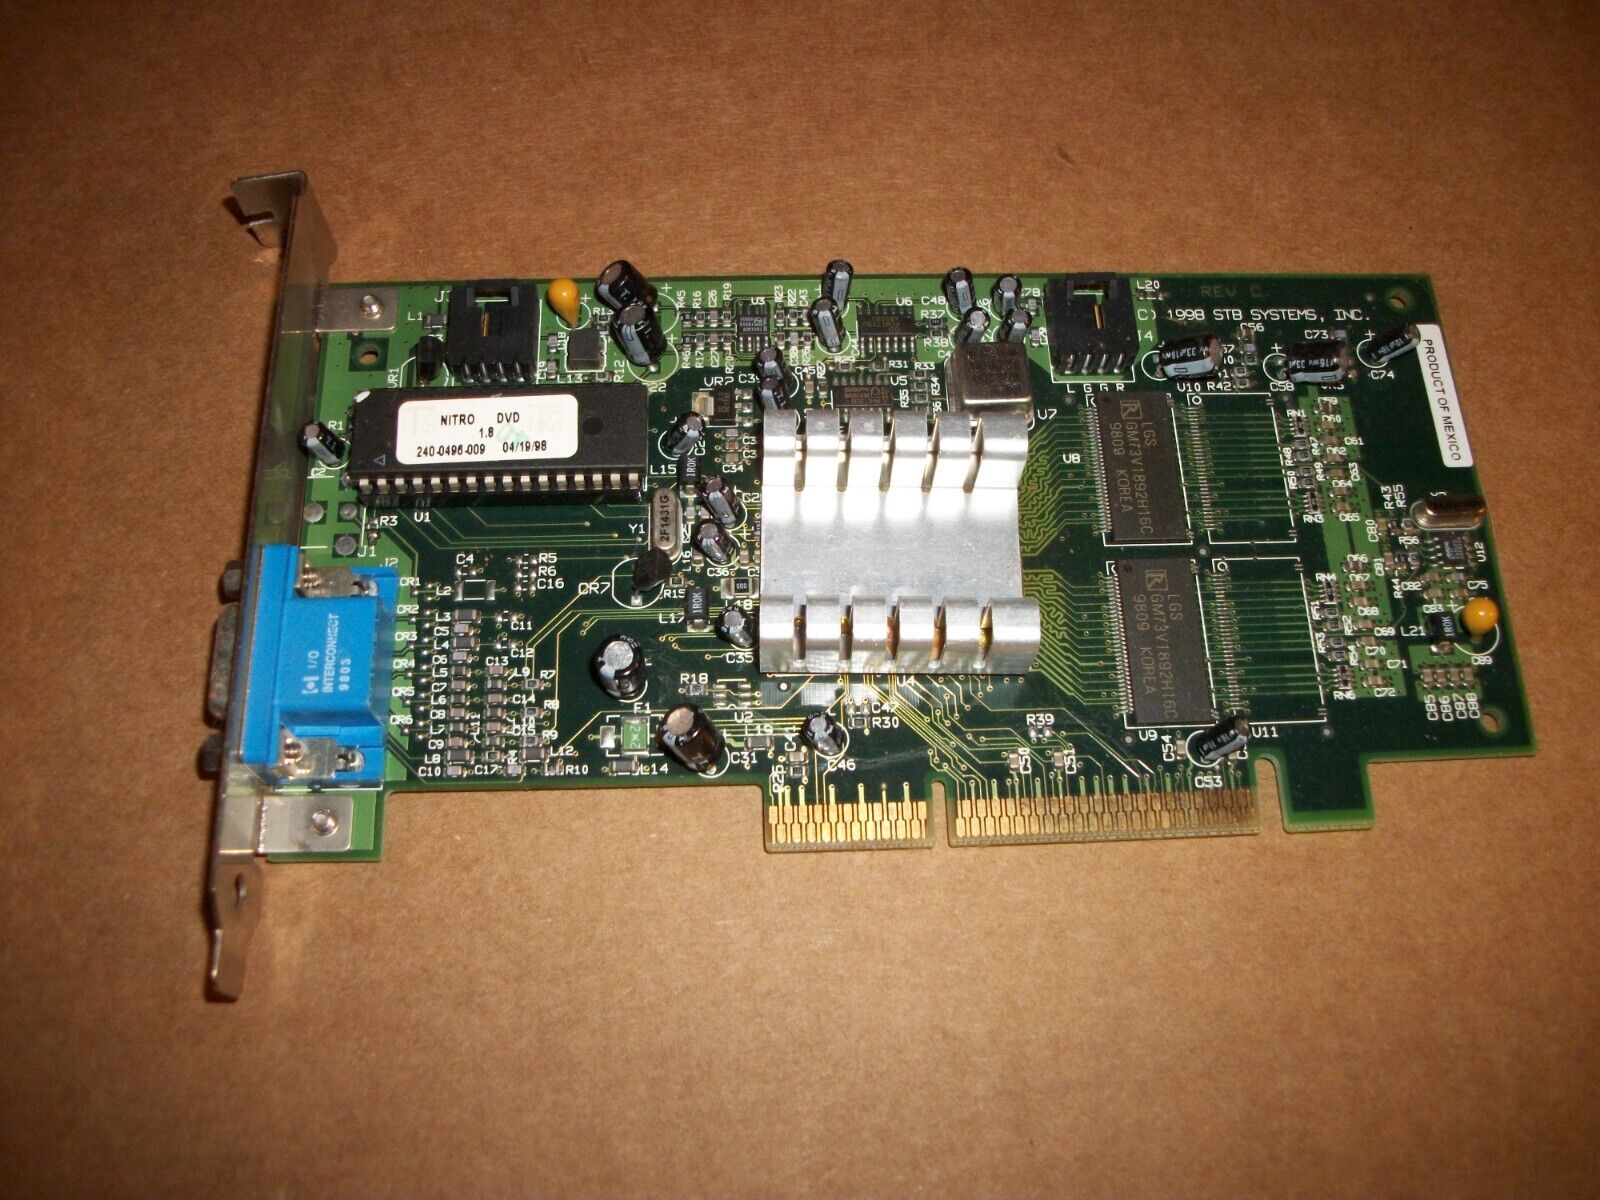 Vintage STB Systems 1998 - VGA card untested